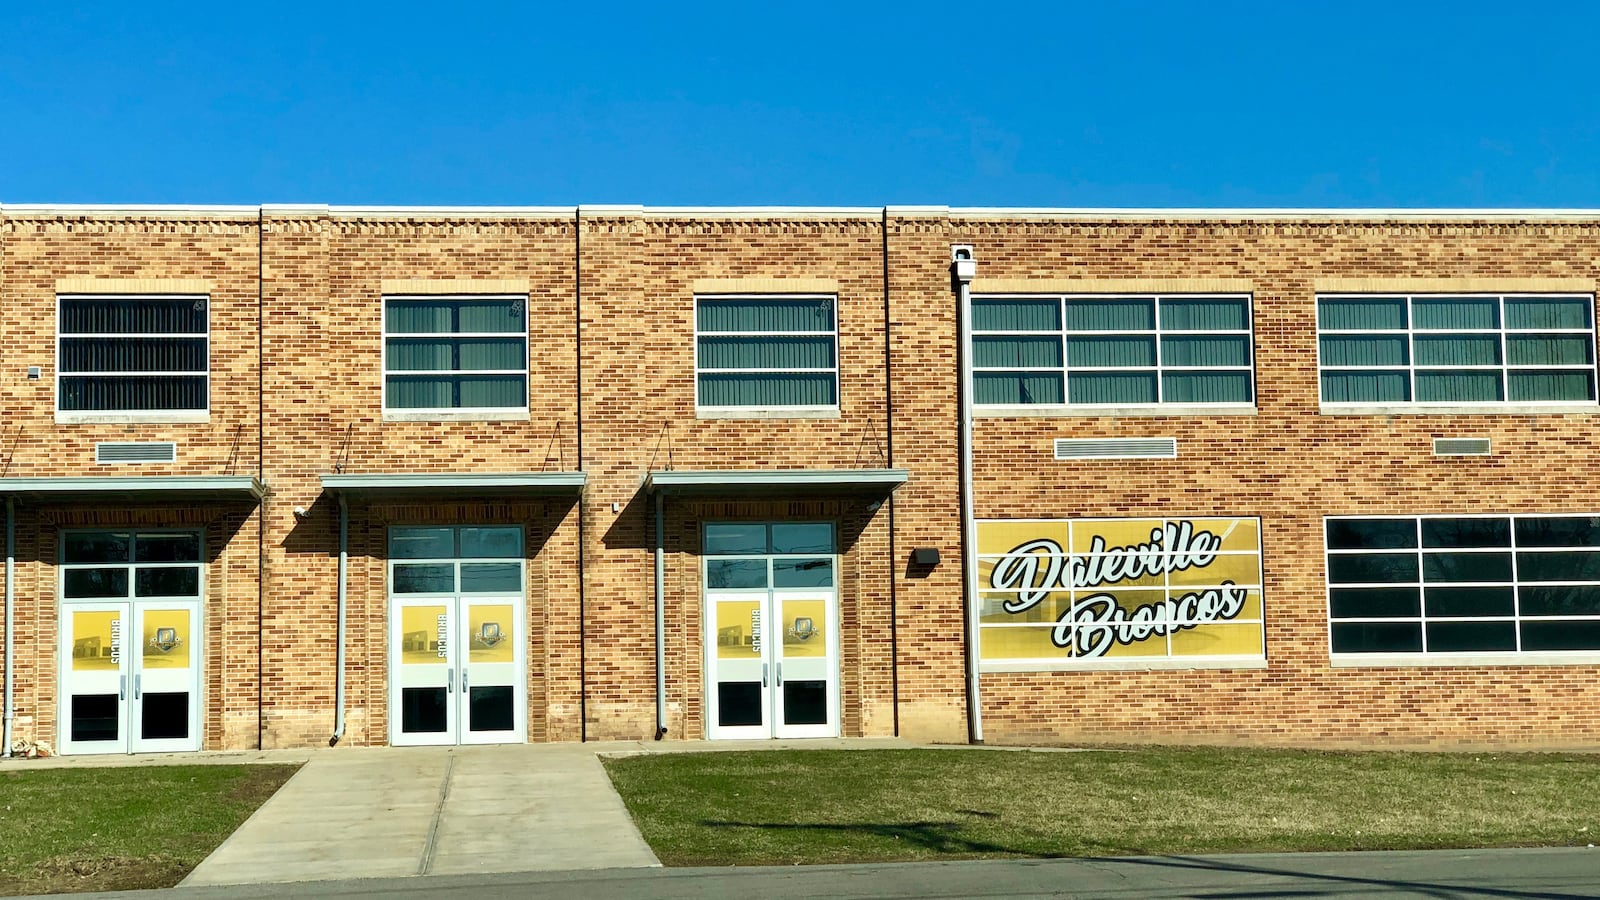 Daleville Public Schools, a small district located near Muncie, oversees two statewide online charter schools. They voted to extend the timeline for the process to revoke the charters on Monday.